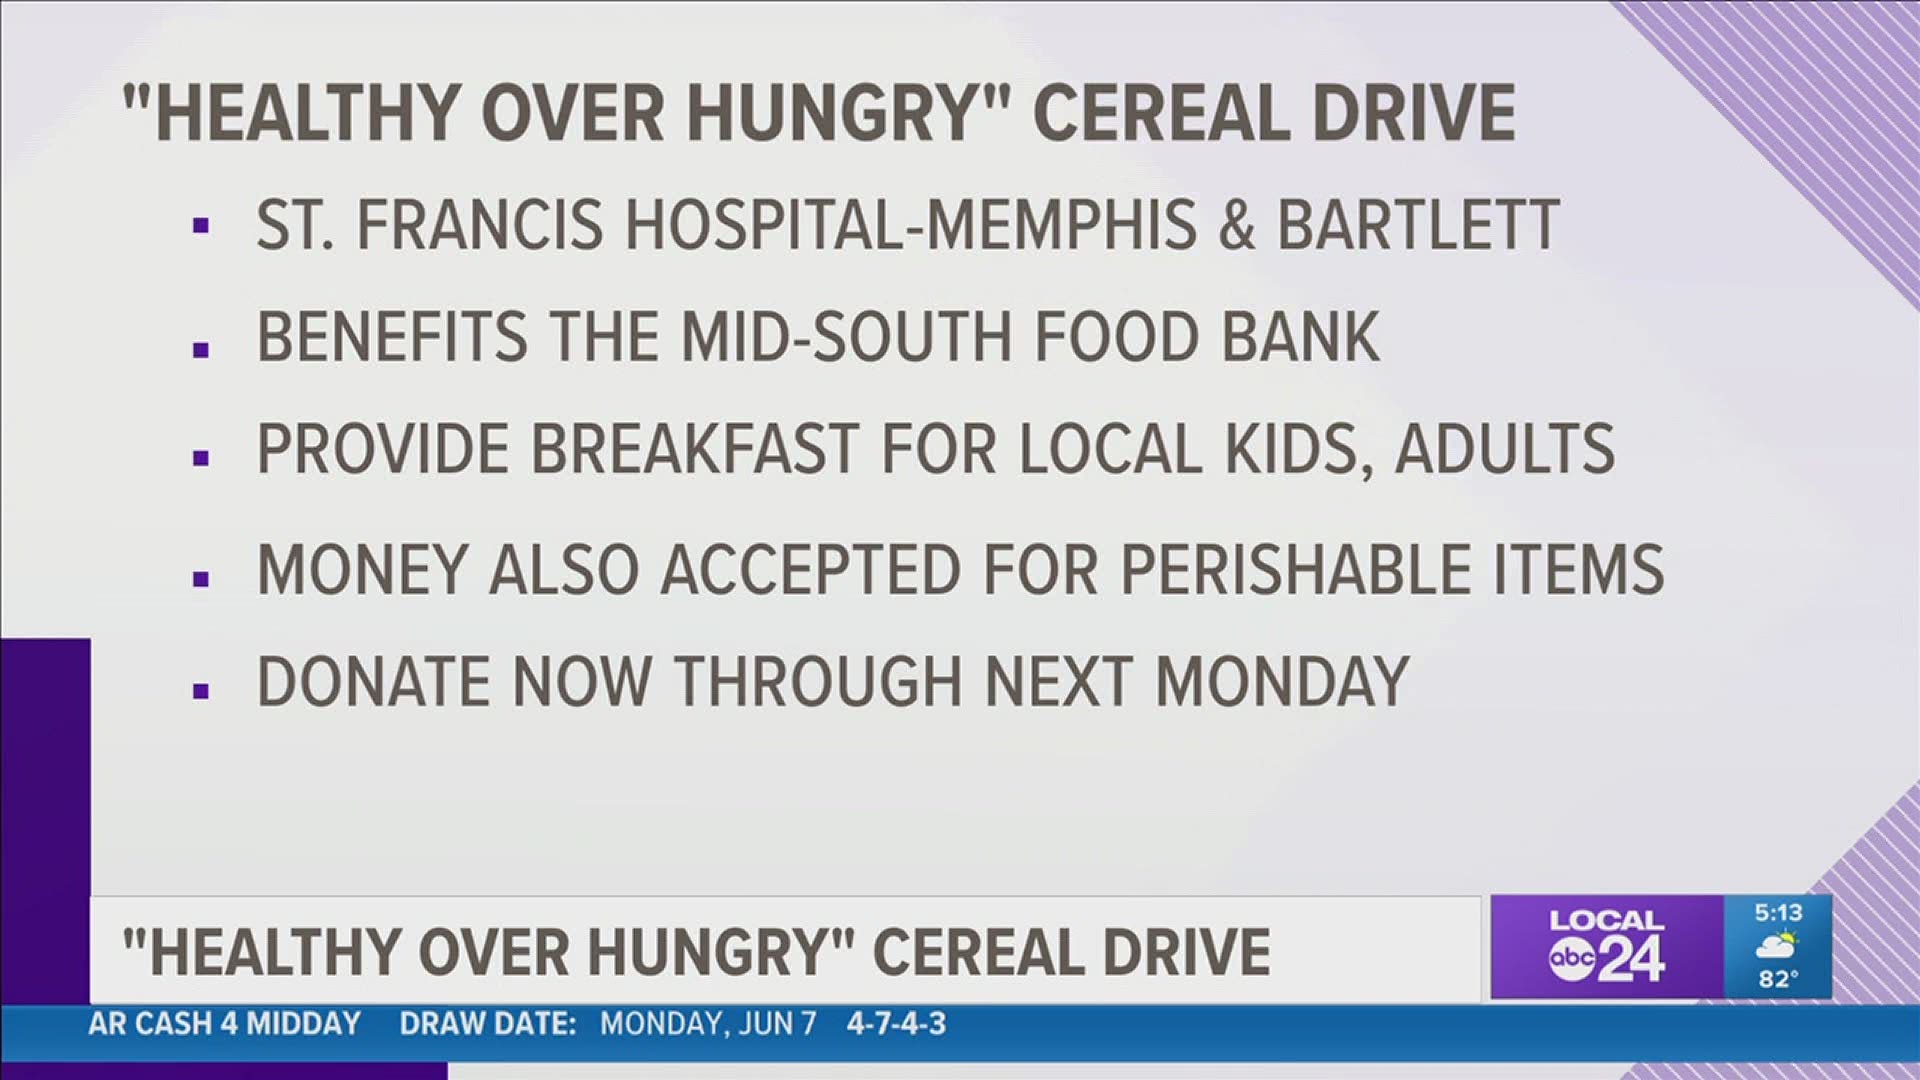 The Healthy Over Hungry® Cereal Drive runs through Monday, June 14. It's an effort to provide kids & adults a healthy breakfast.